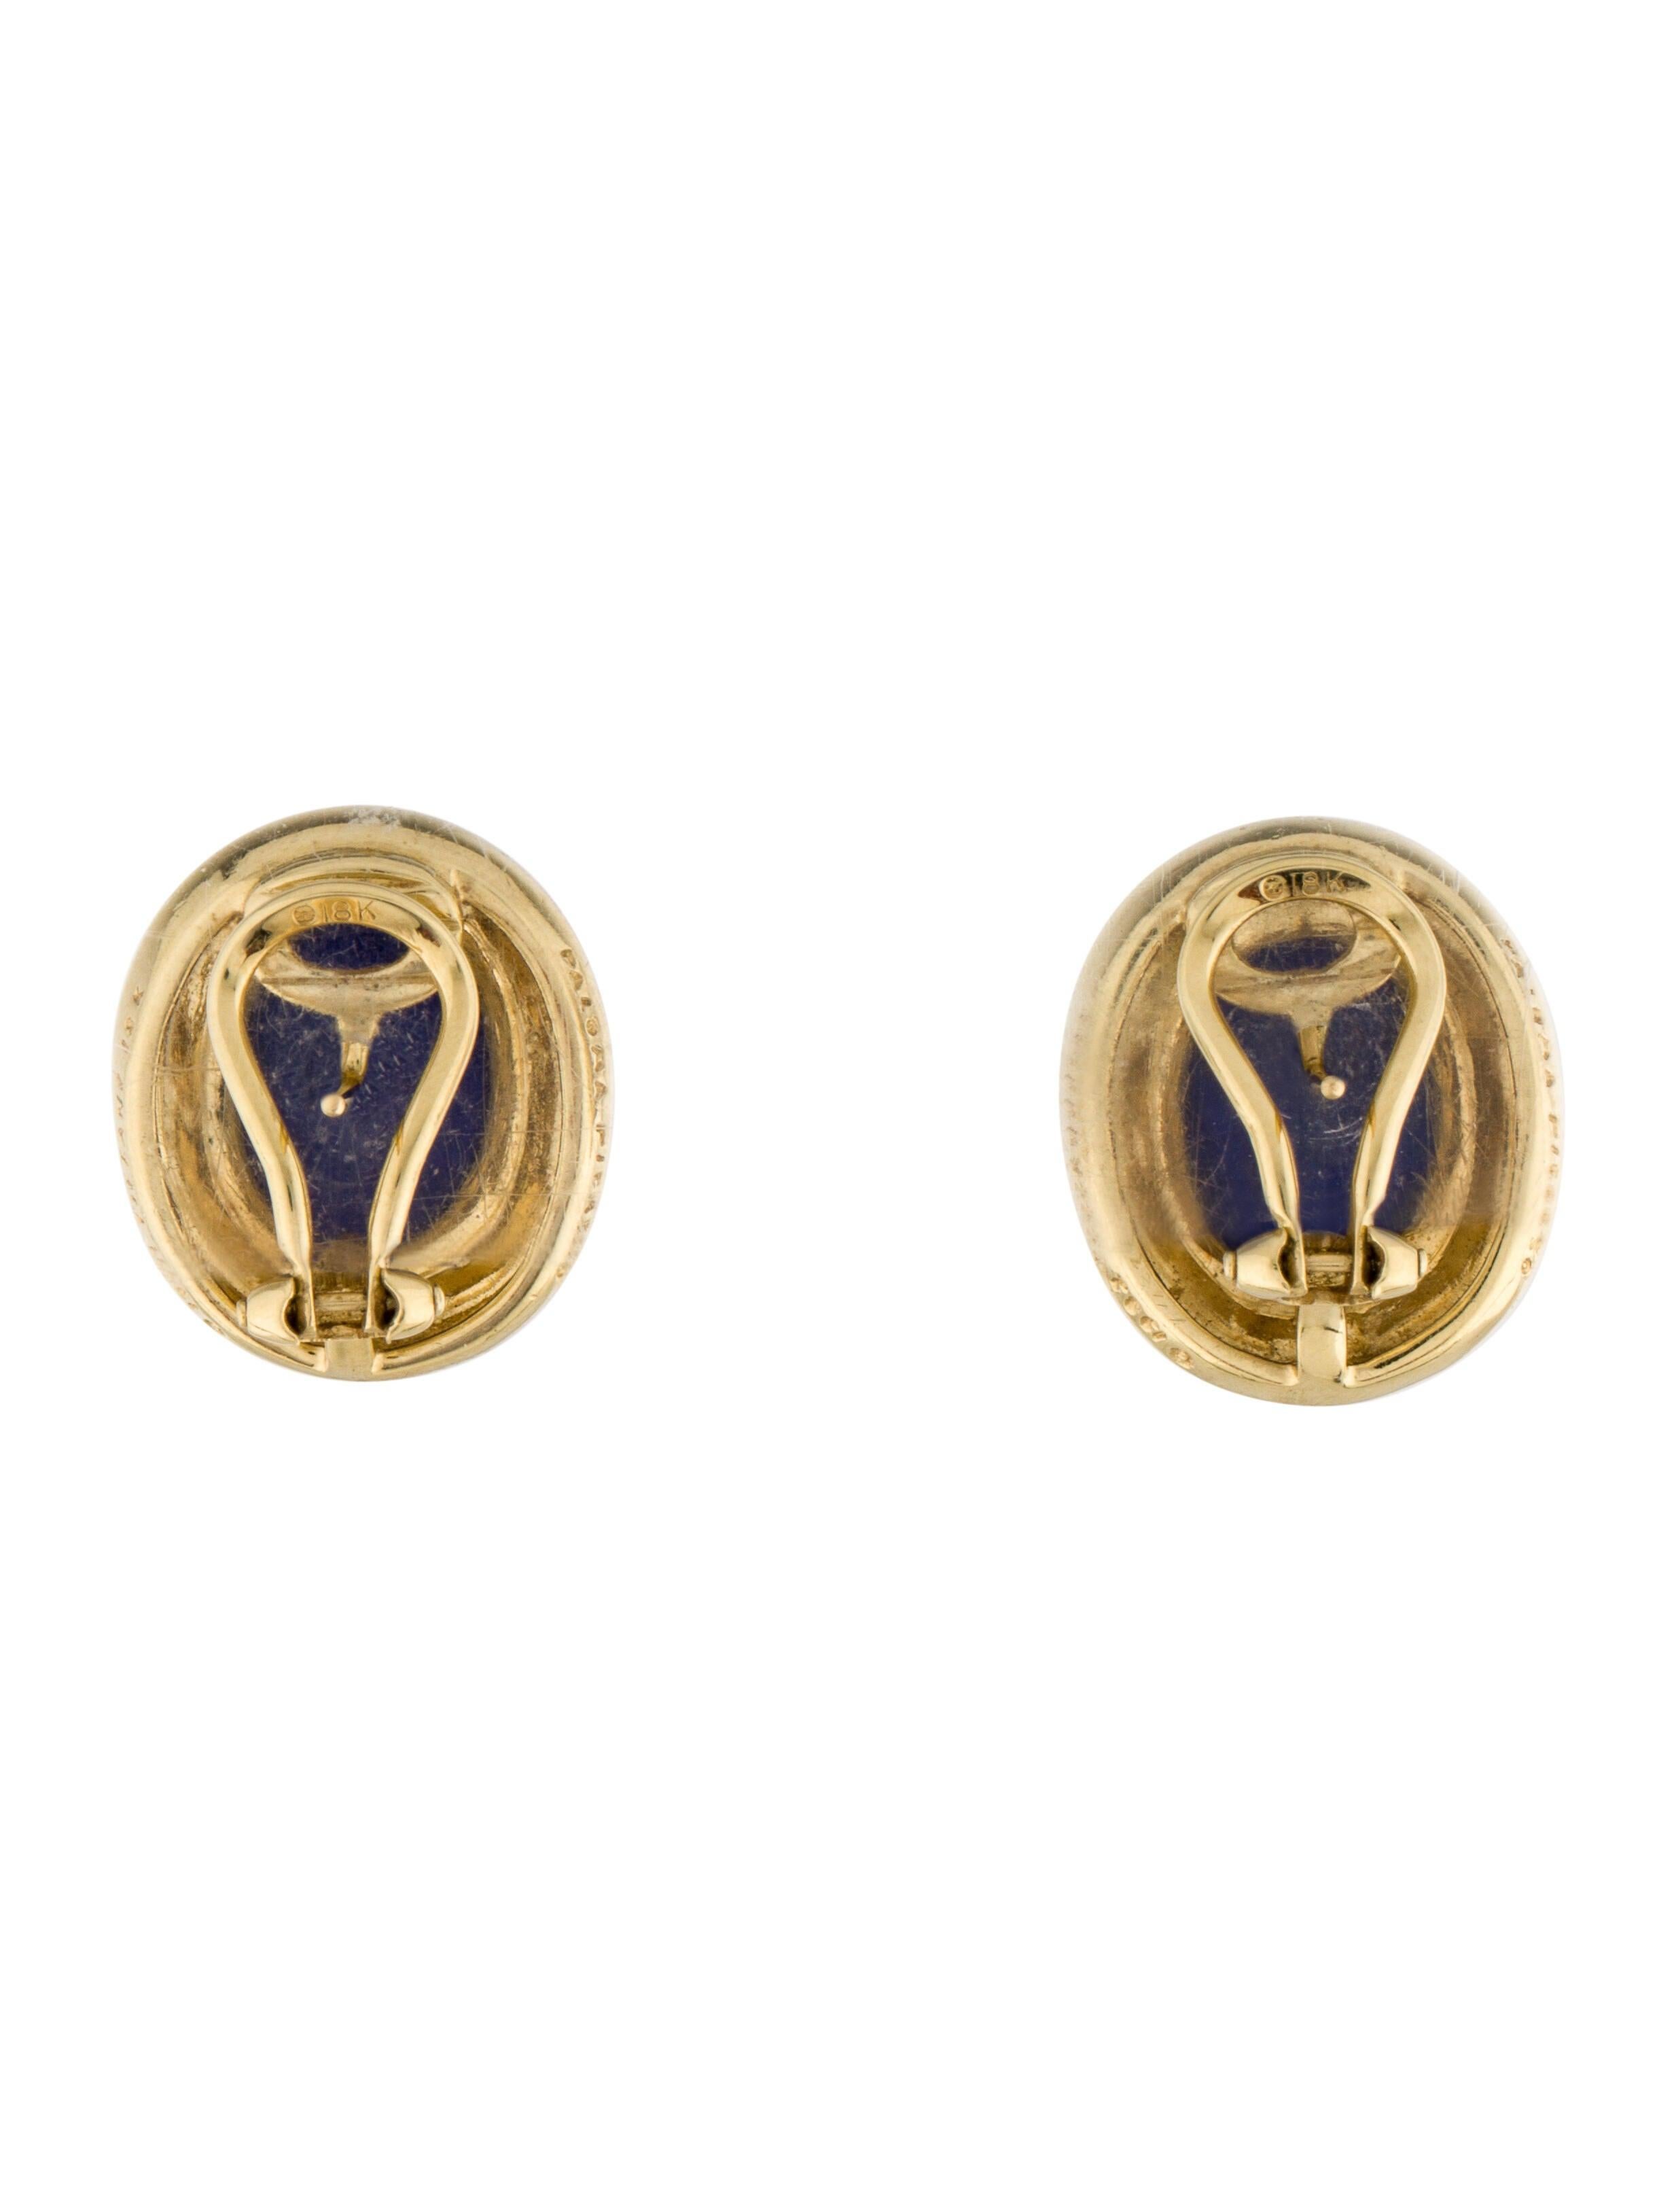 Tiffany & Co. Paloma Picasso 18k Yellow Gold & Lapis Earrings circa 1988 Vintage For Sale 3